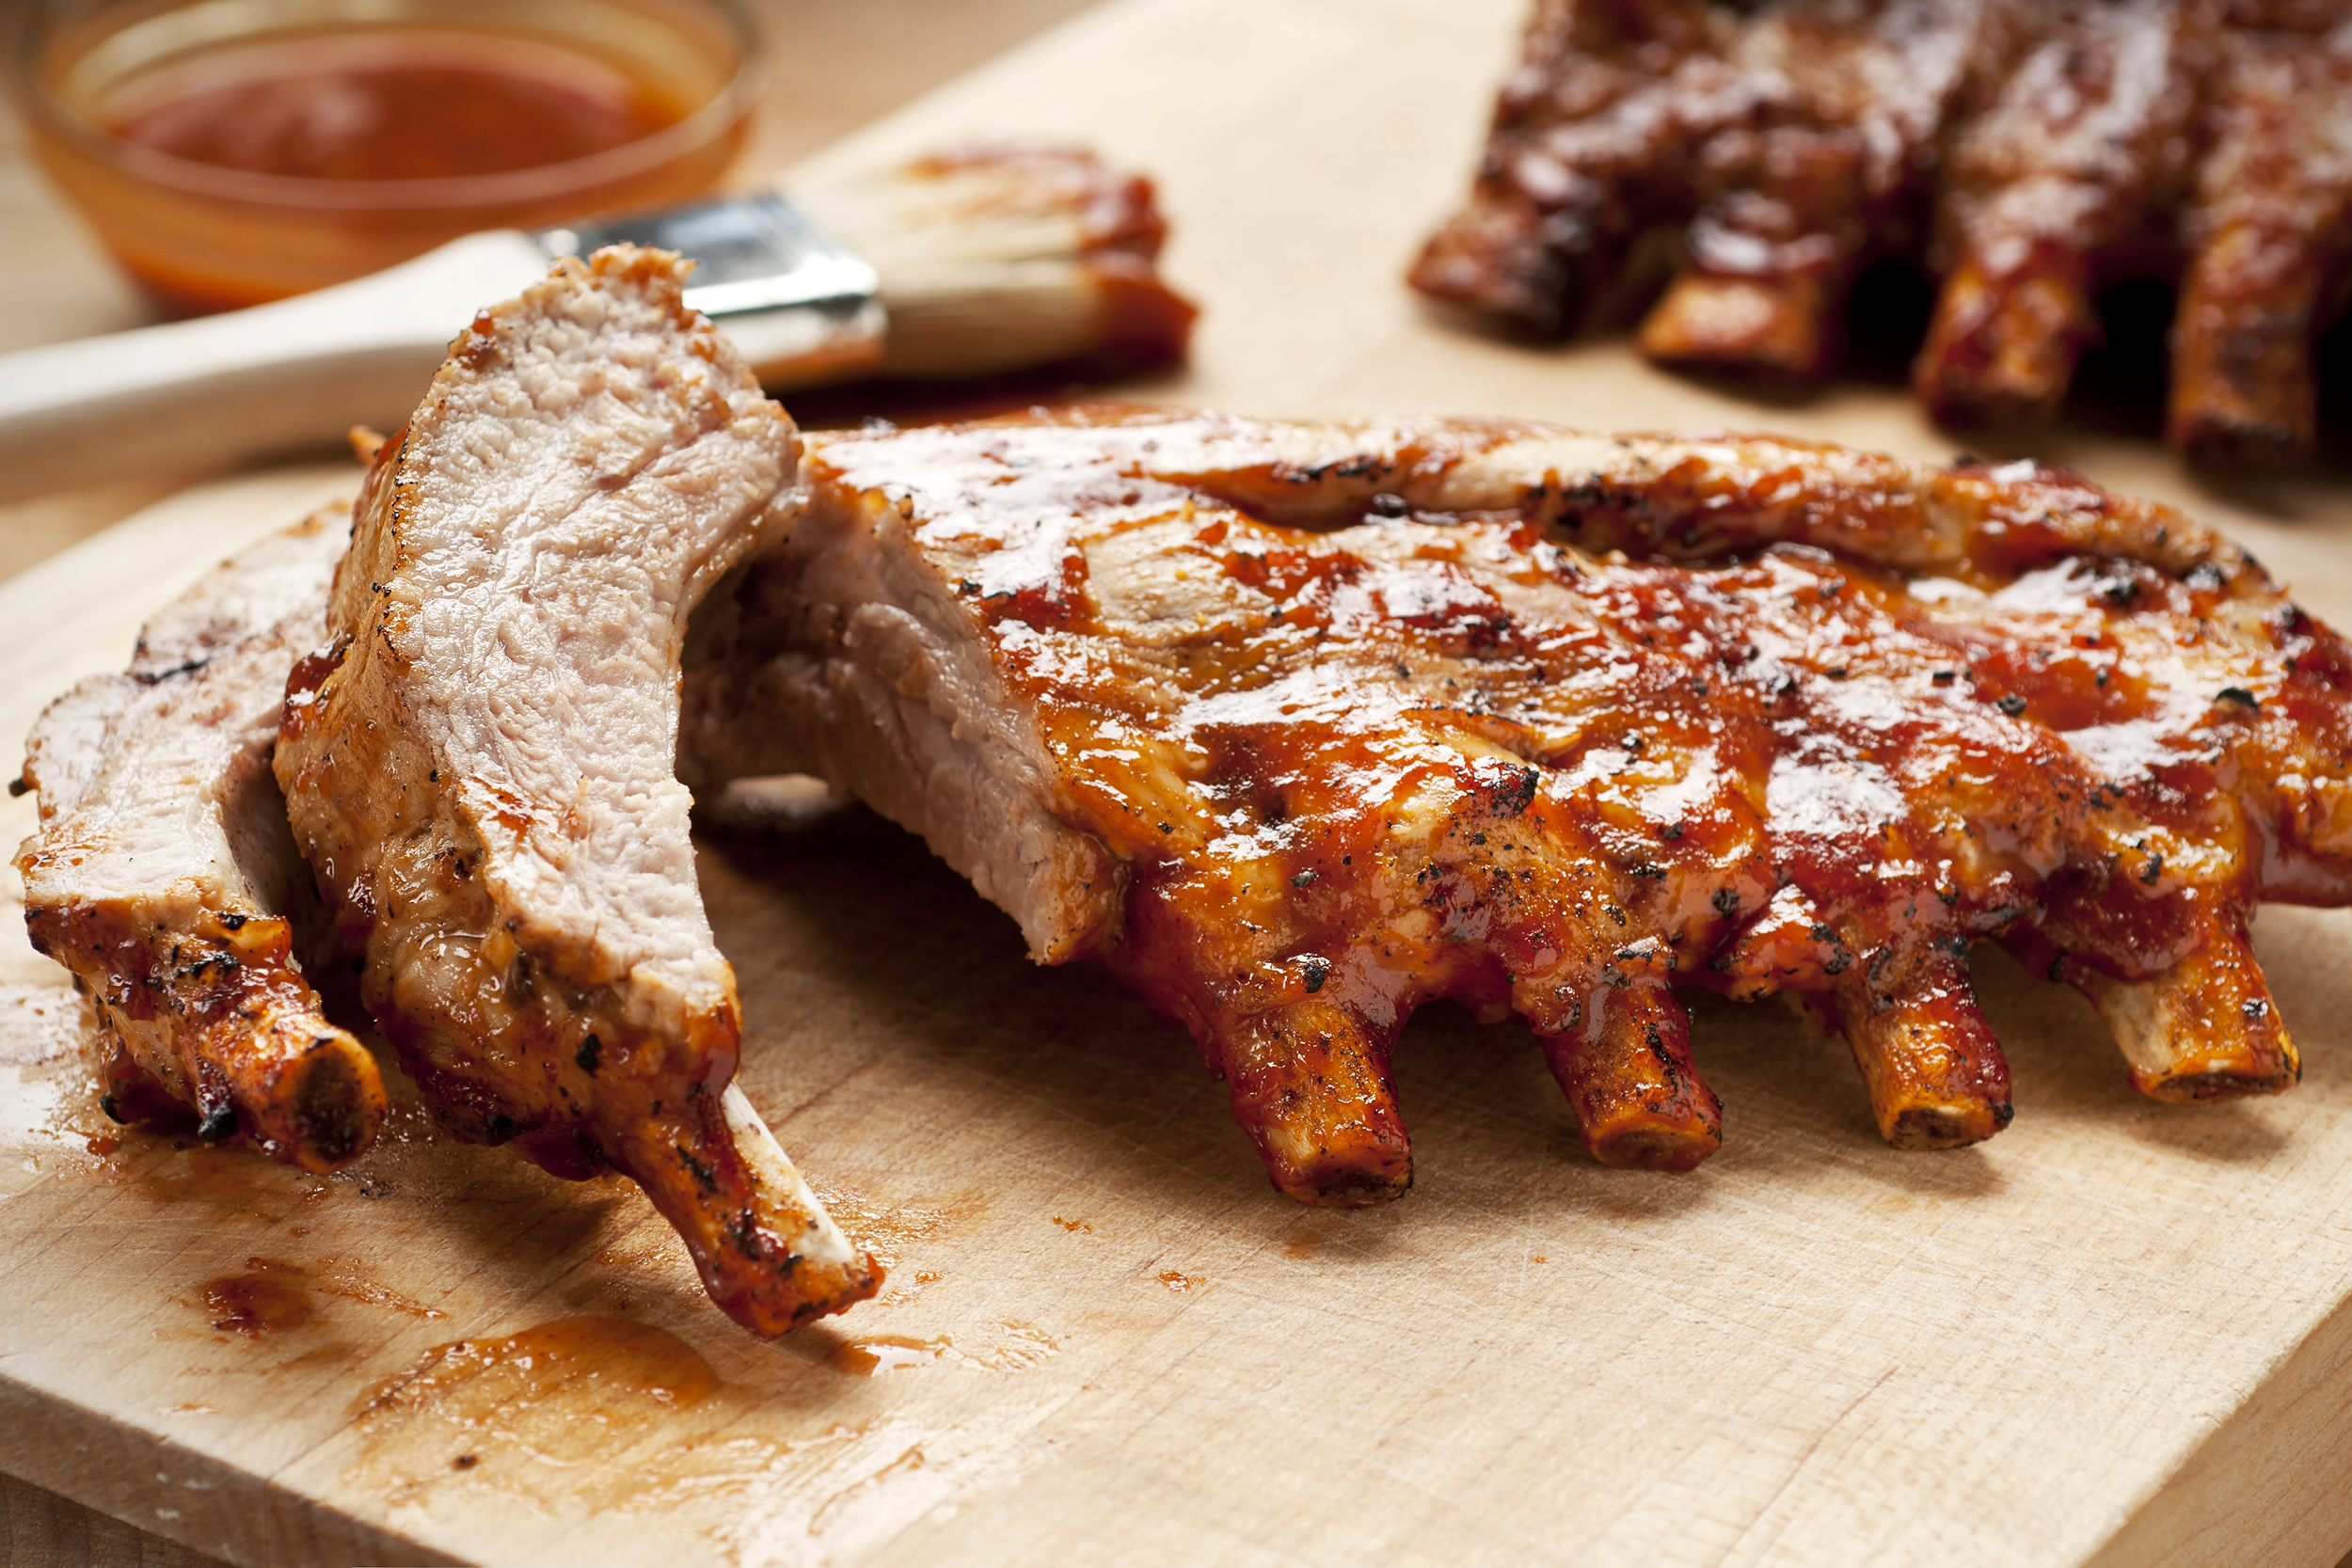 <p>Attention, meat lovers: You can savor these classic ribs from Disneyland's now-closed Big Thunder Ranch at home. Make sure you have a full pantry to whip up the all-important rub, a blend of 10 spices including lemon pepper, paprika, cumin, and garlic powder. </p>  <p><a href="https://d23.com/disneylands-big-thunder-ribs/">D23</a></p>  <p><a href="https://blog.cheapism.com/celebrity-chefs-barbecue-recipes/">Barbecue Recipes and Tricks From Celebrity Chefs</a> </p>